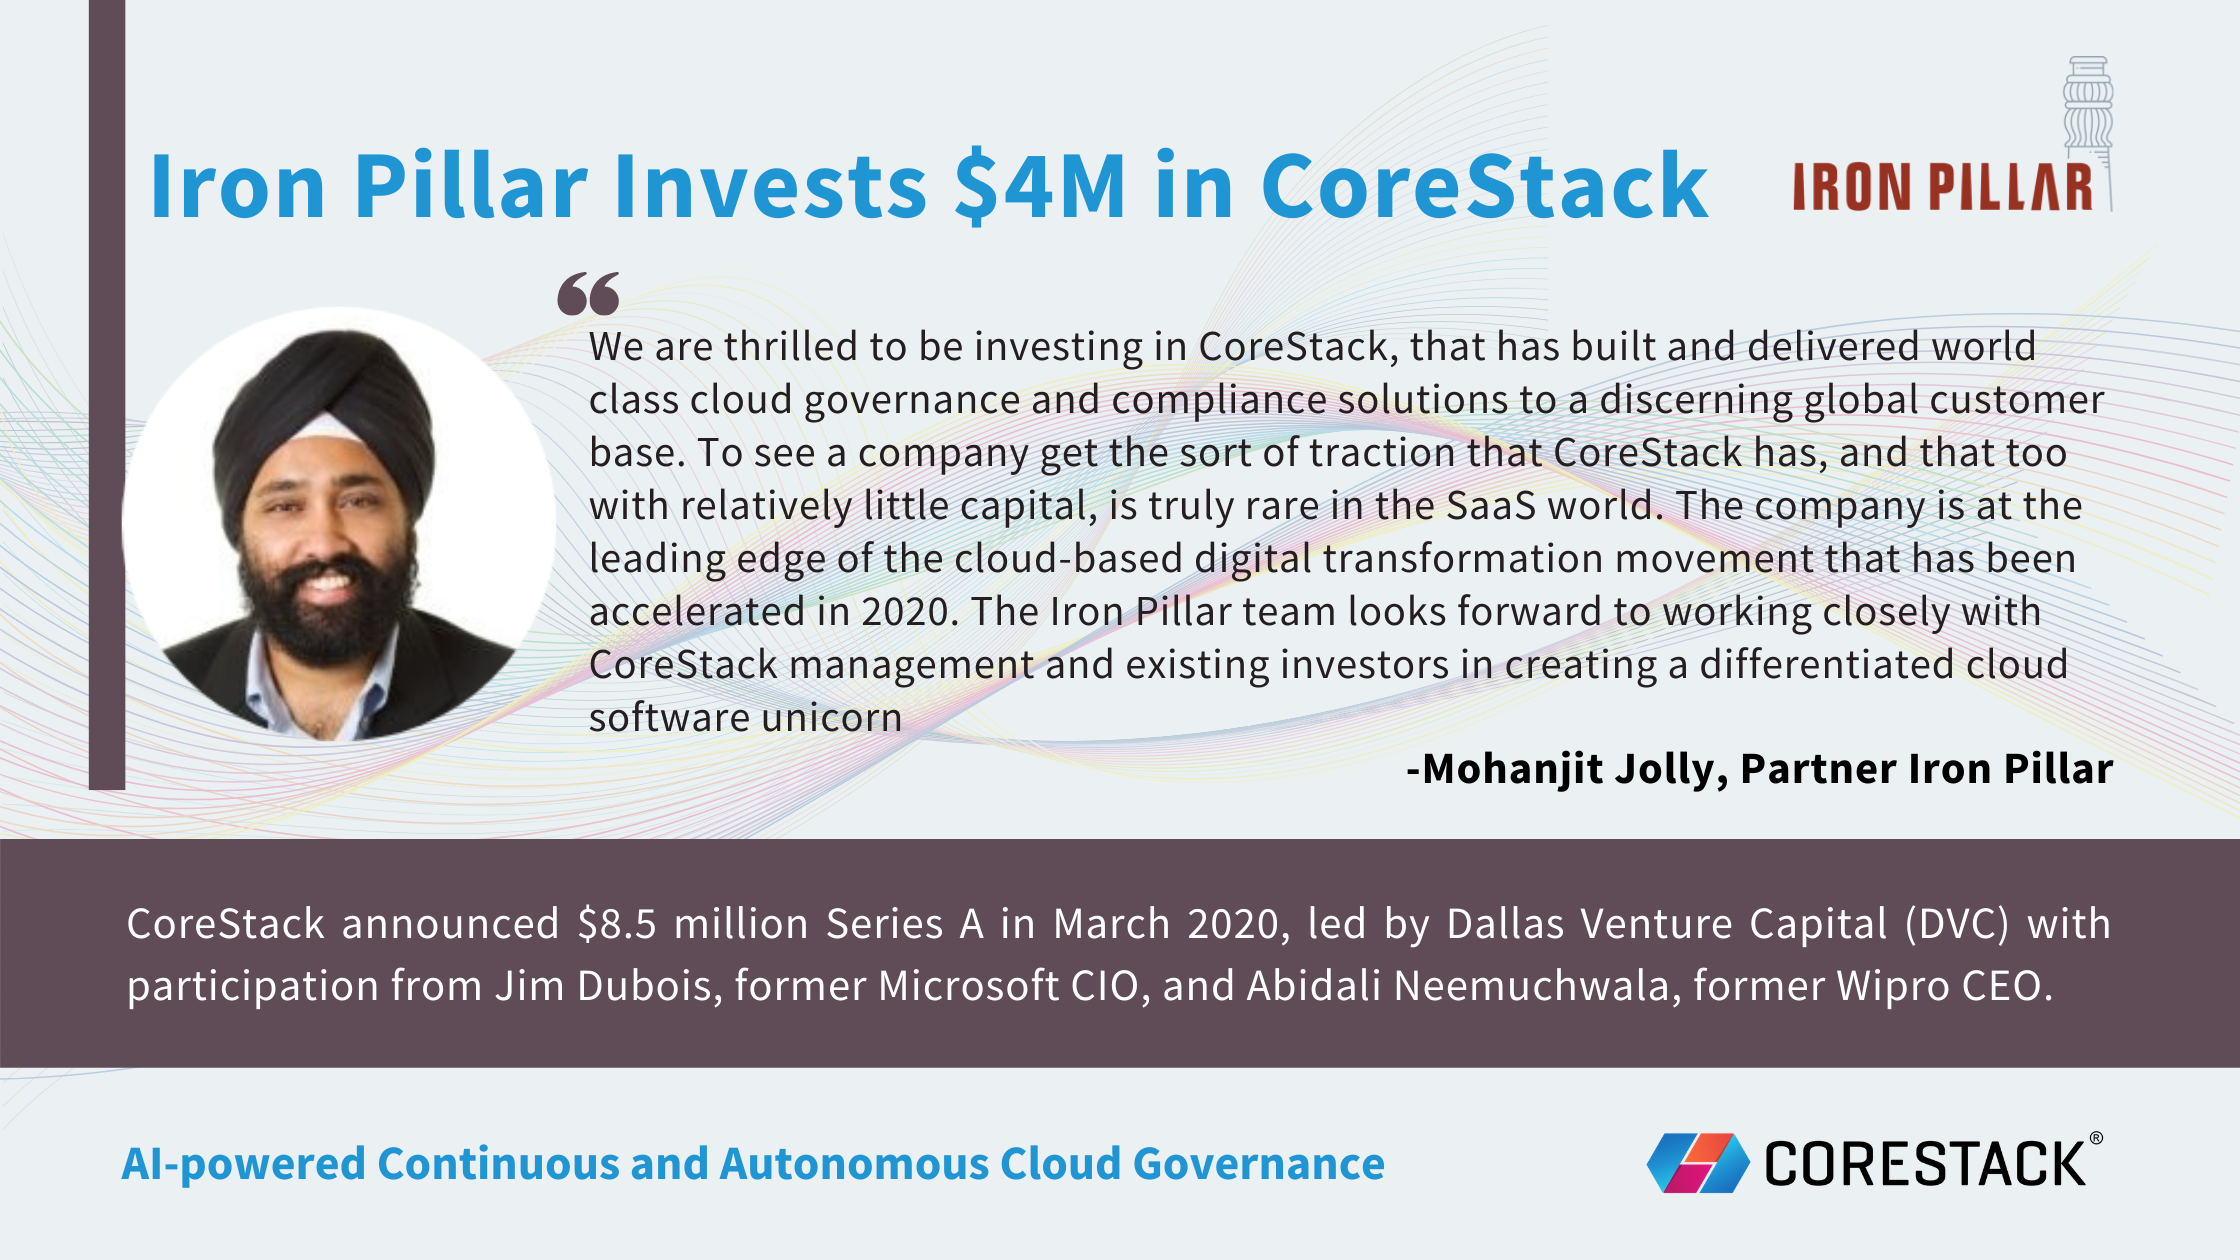 Iron Pillar, a venture growth investor backing companies, announced a $4M investment in CoreStack